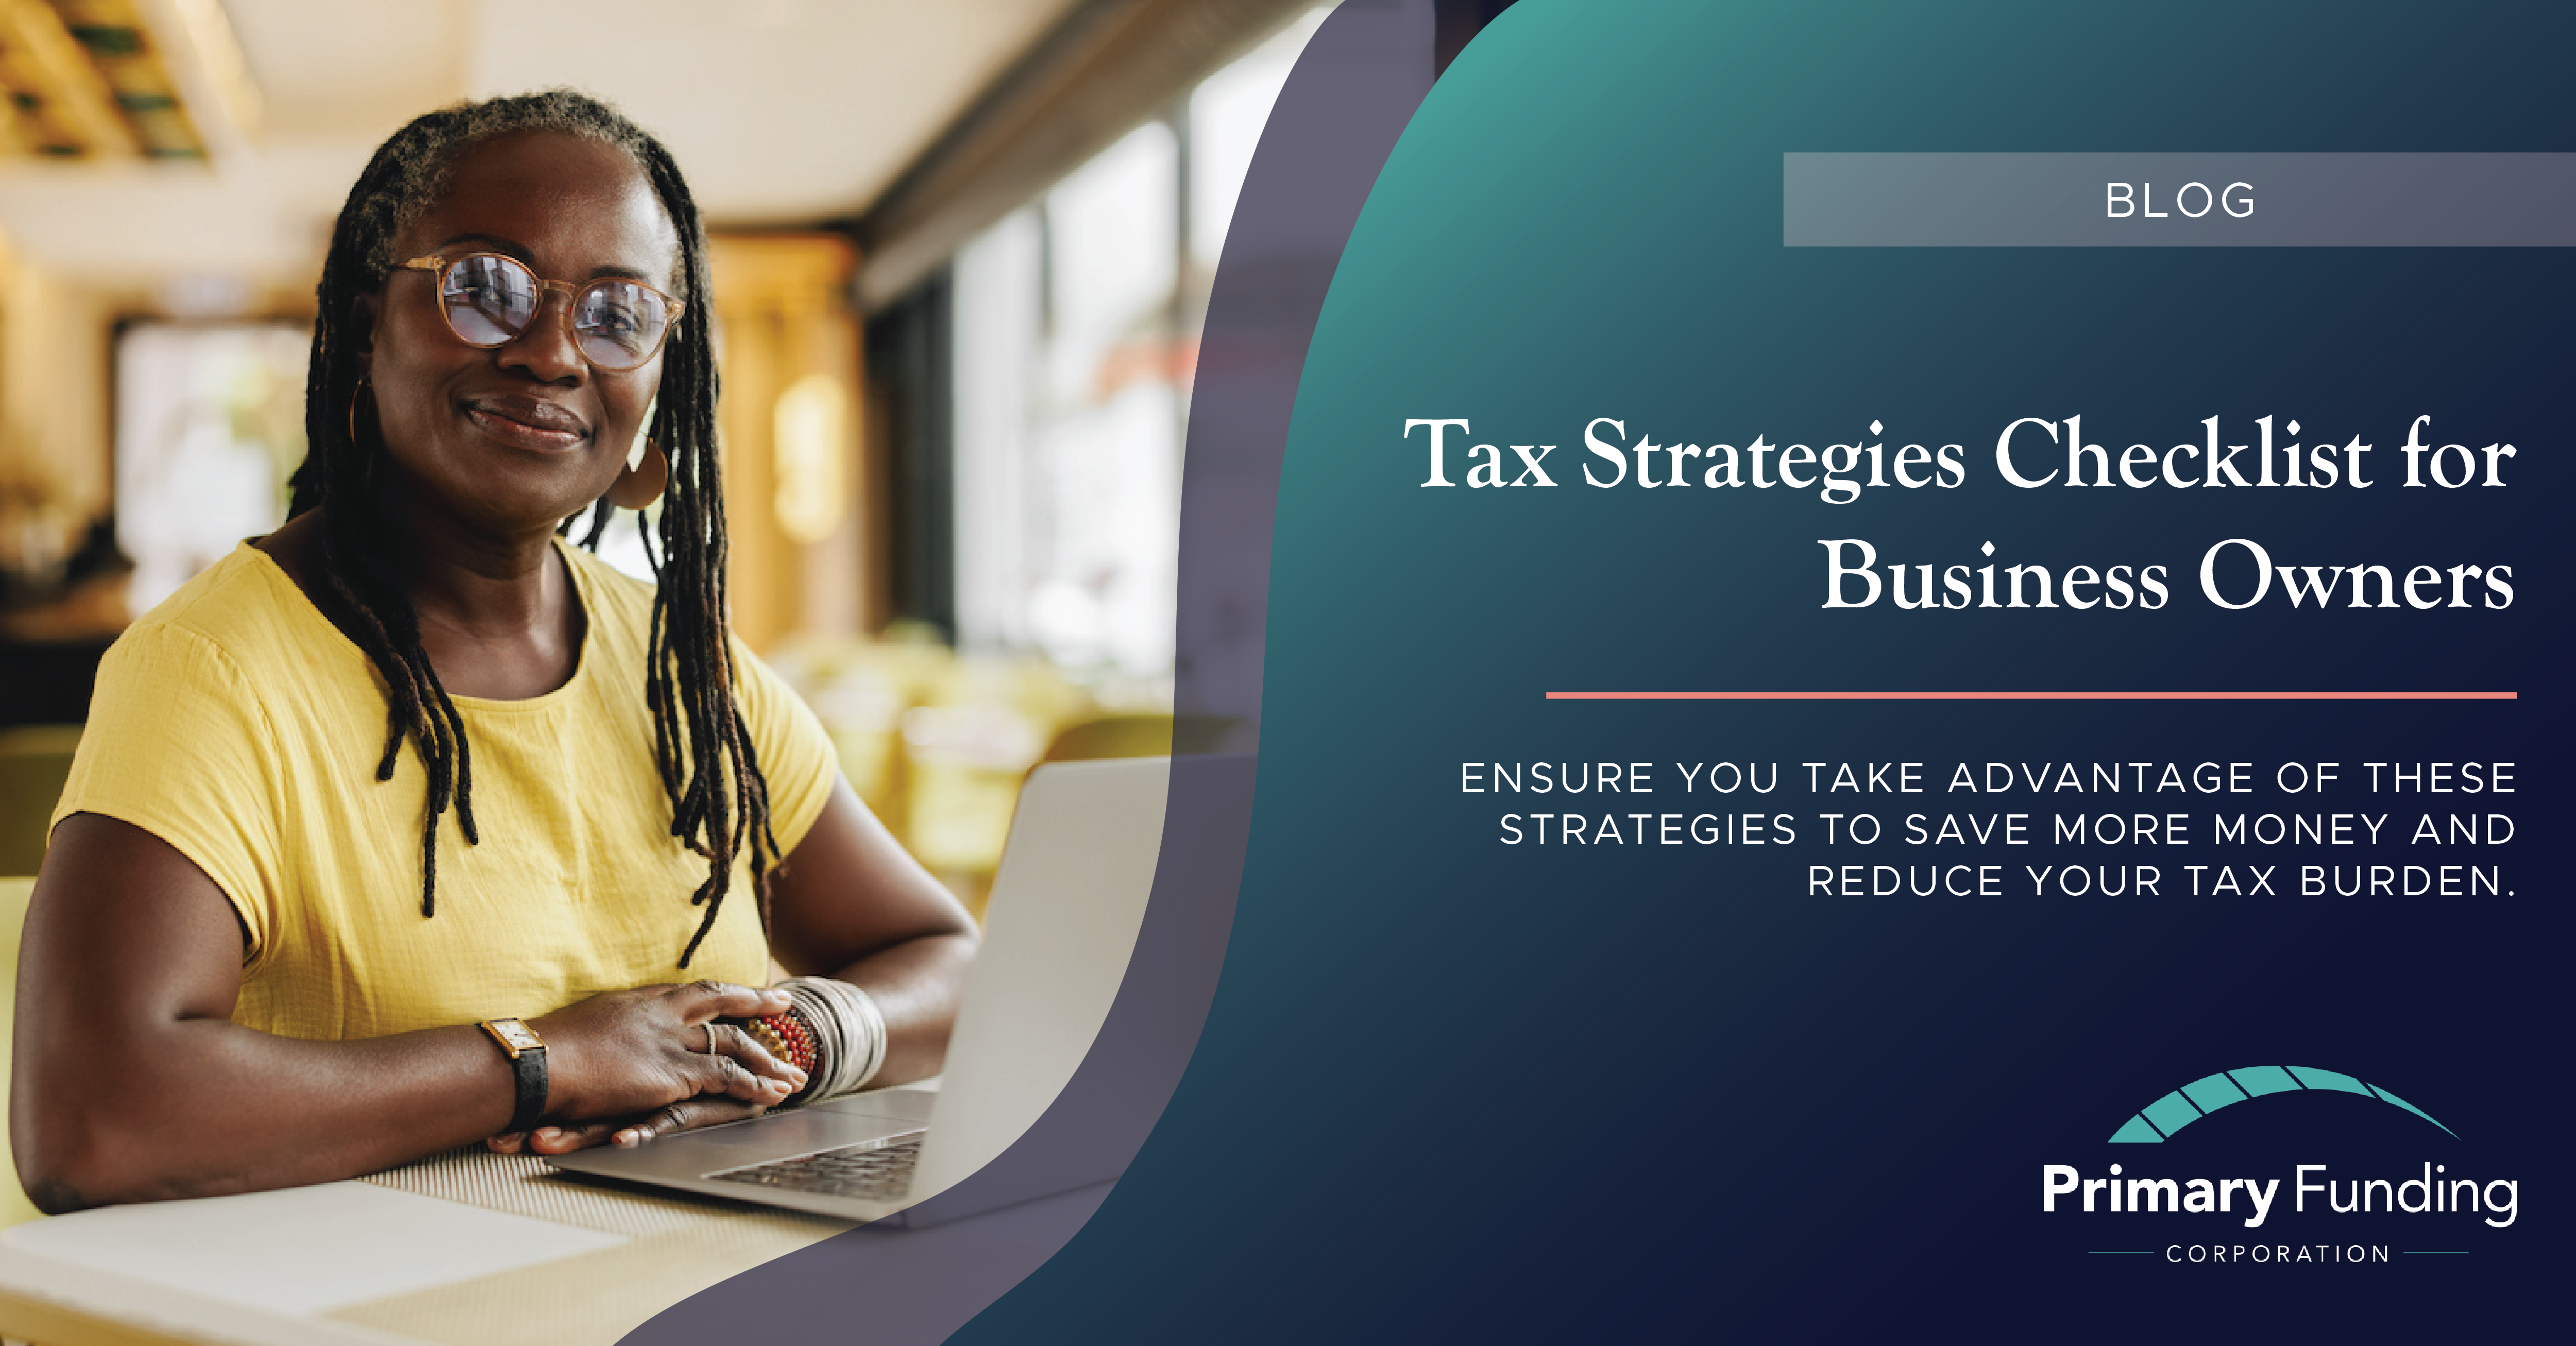 Tax Strategies For Business Owners Checklist